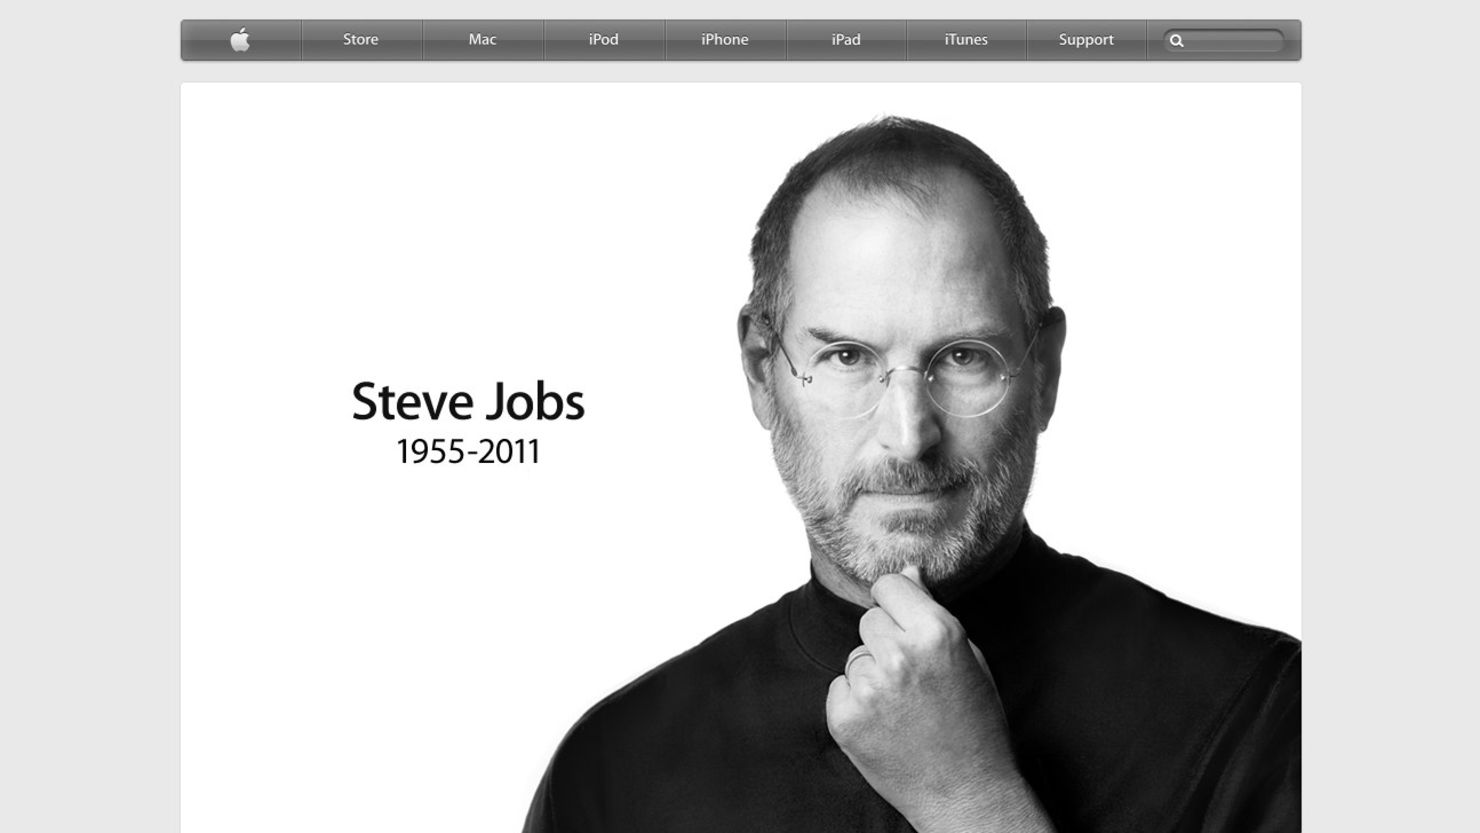 Apple updated its website Wednesday to reflect the death of Steve Jobs.